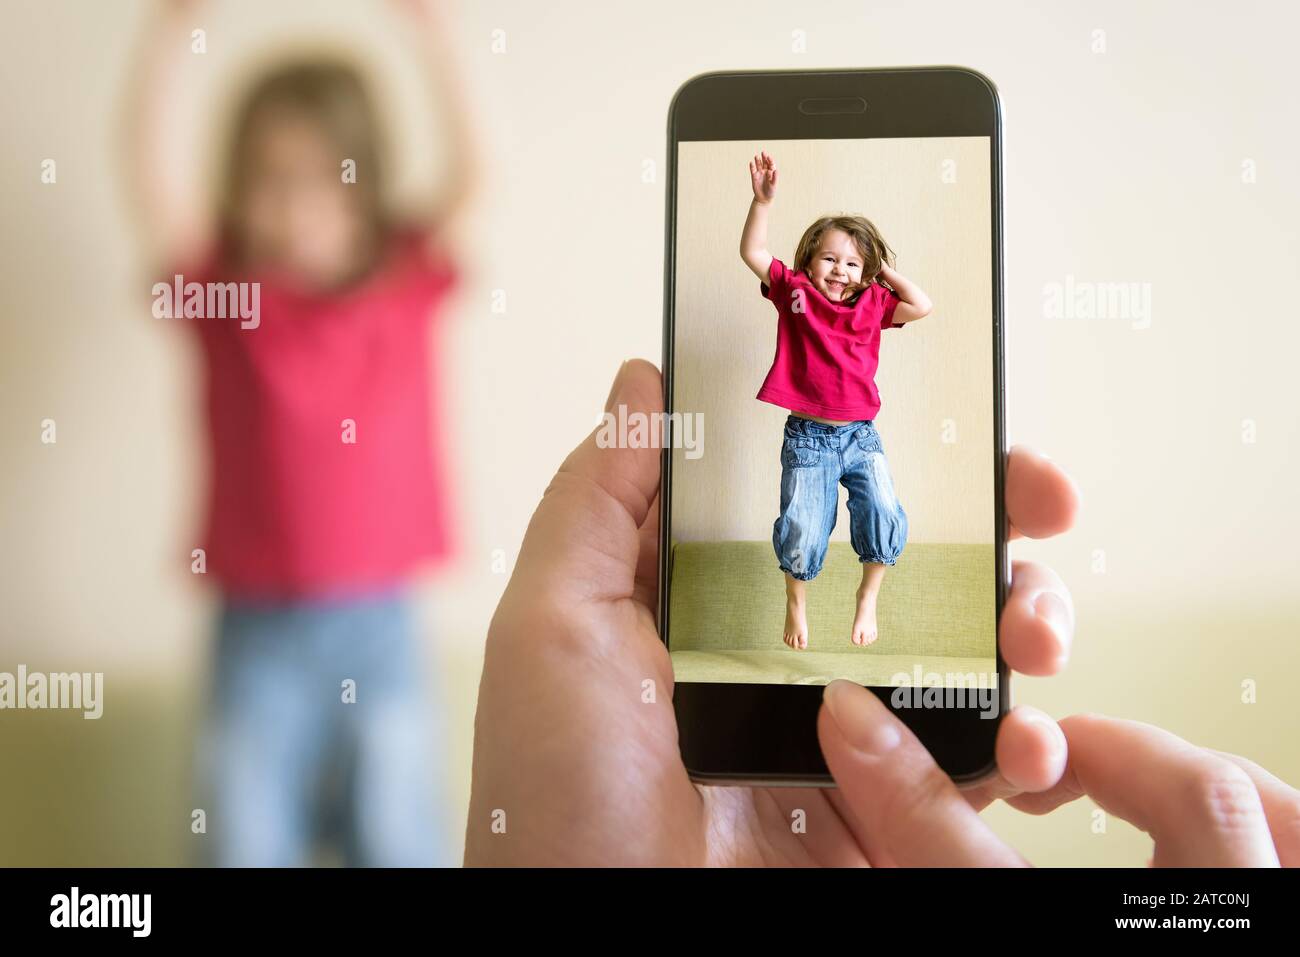 Funny three-year-old child jump on couch. Mother taking photo of baby girl with her mobile phone. Photography of happy kid playing and jumping at home Stock Photo